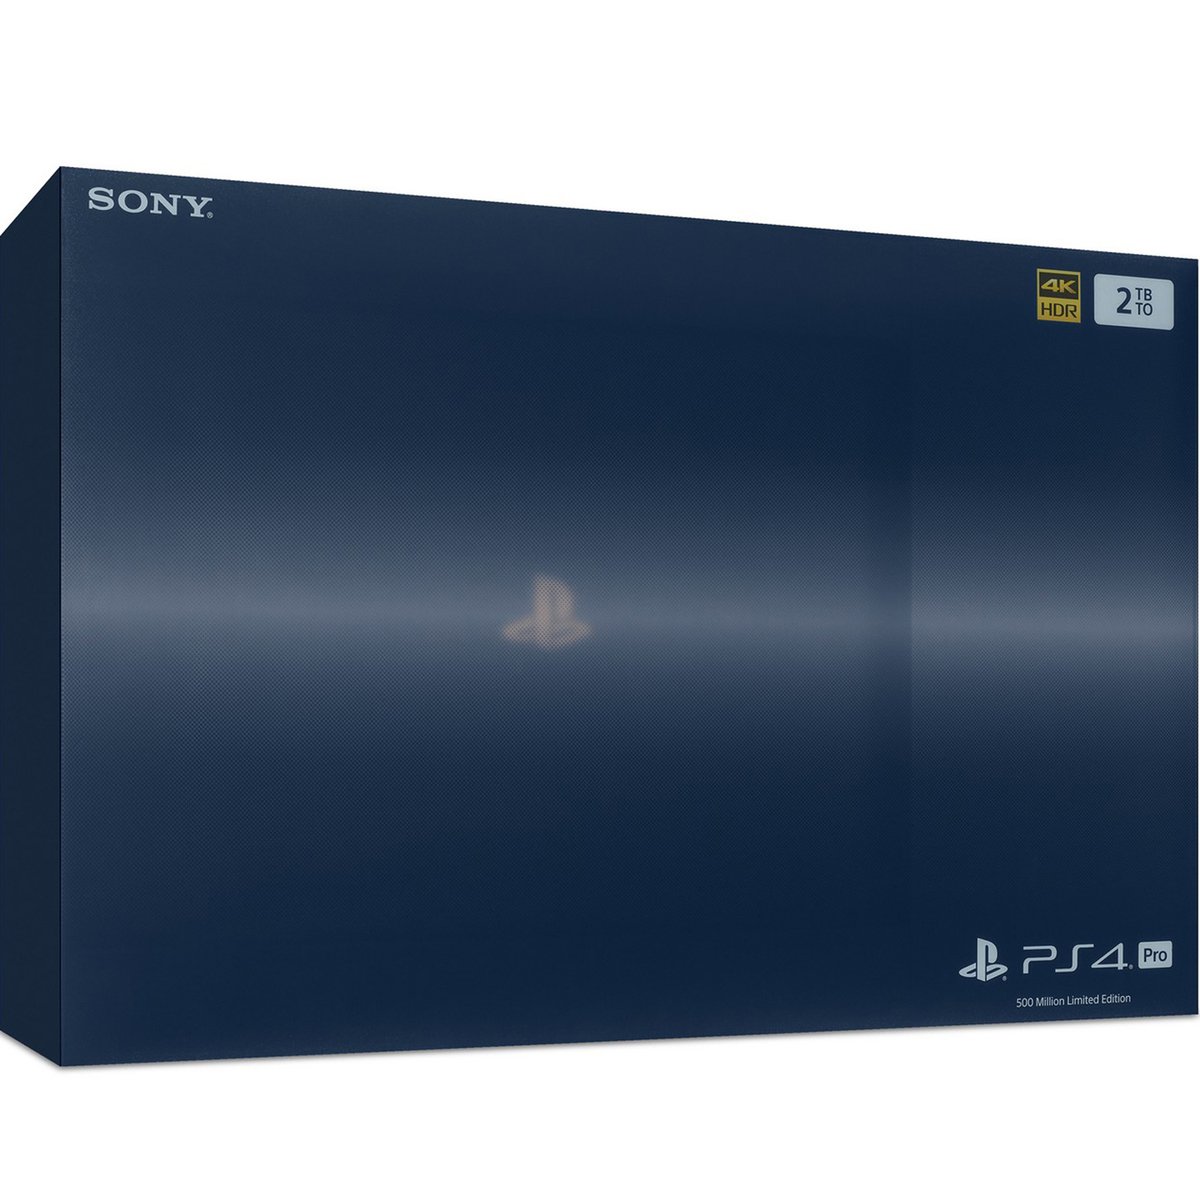 Sony PS4 Pro 2TB 500 Million Limited Edition B Chassis